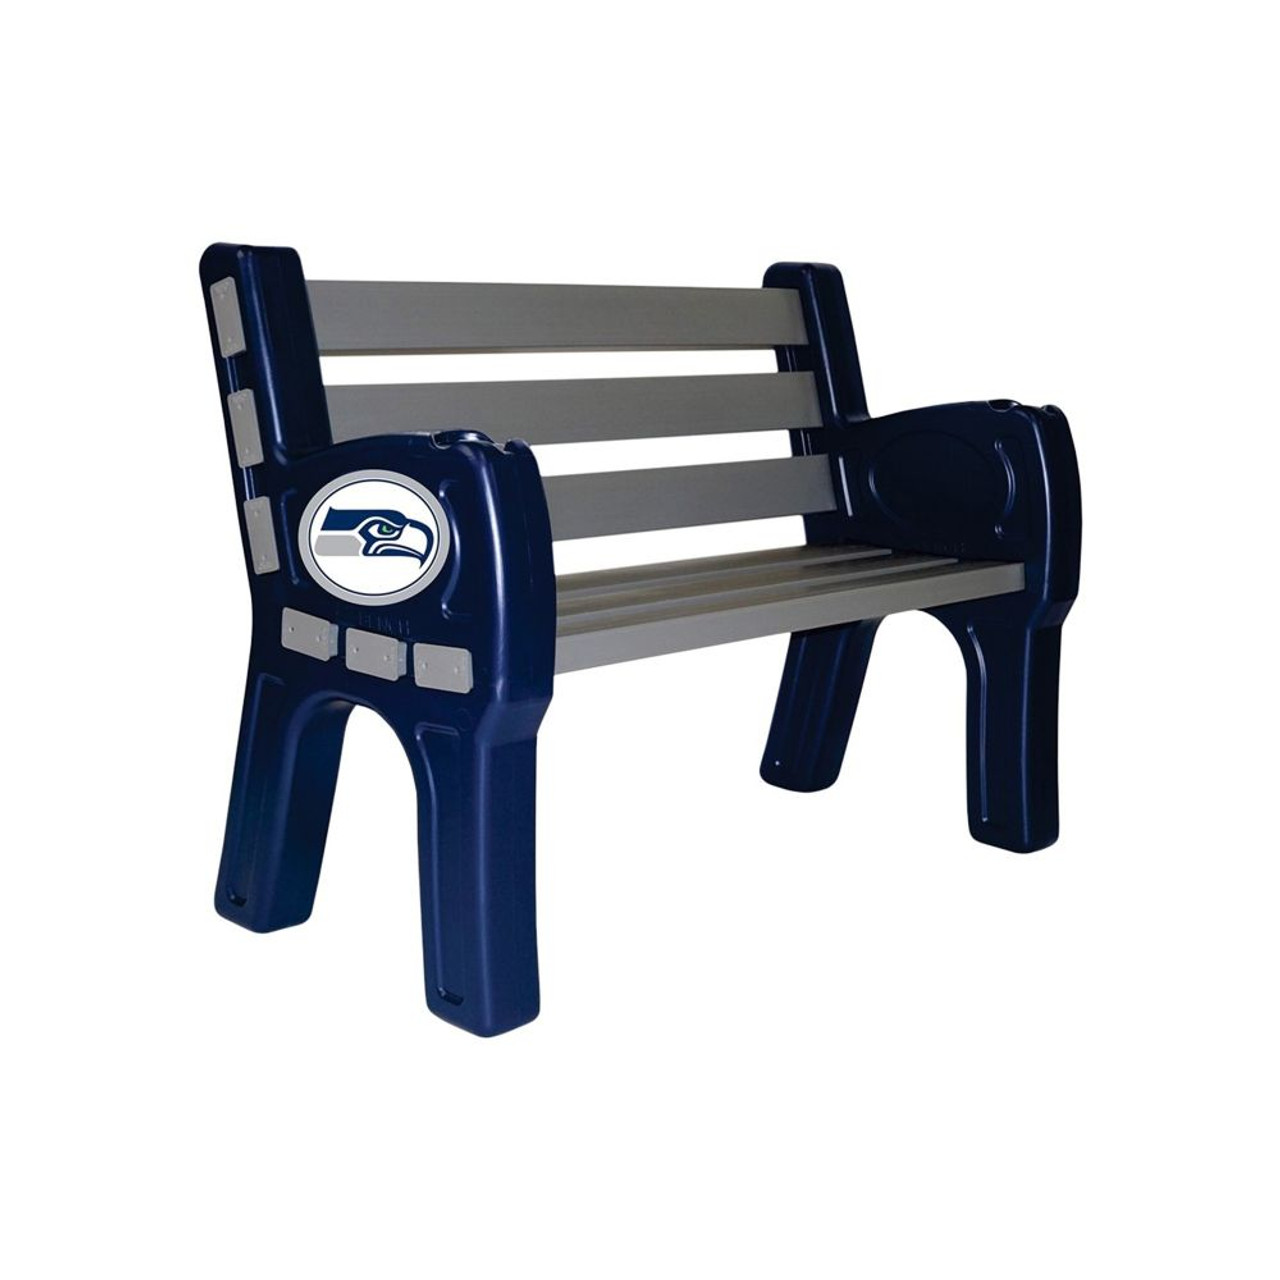 Seattle, Sea, Seahawks, 4', Park, Bench, 188-1024, Imperial, NFL